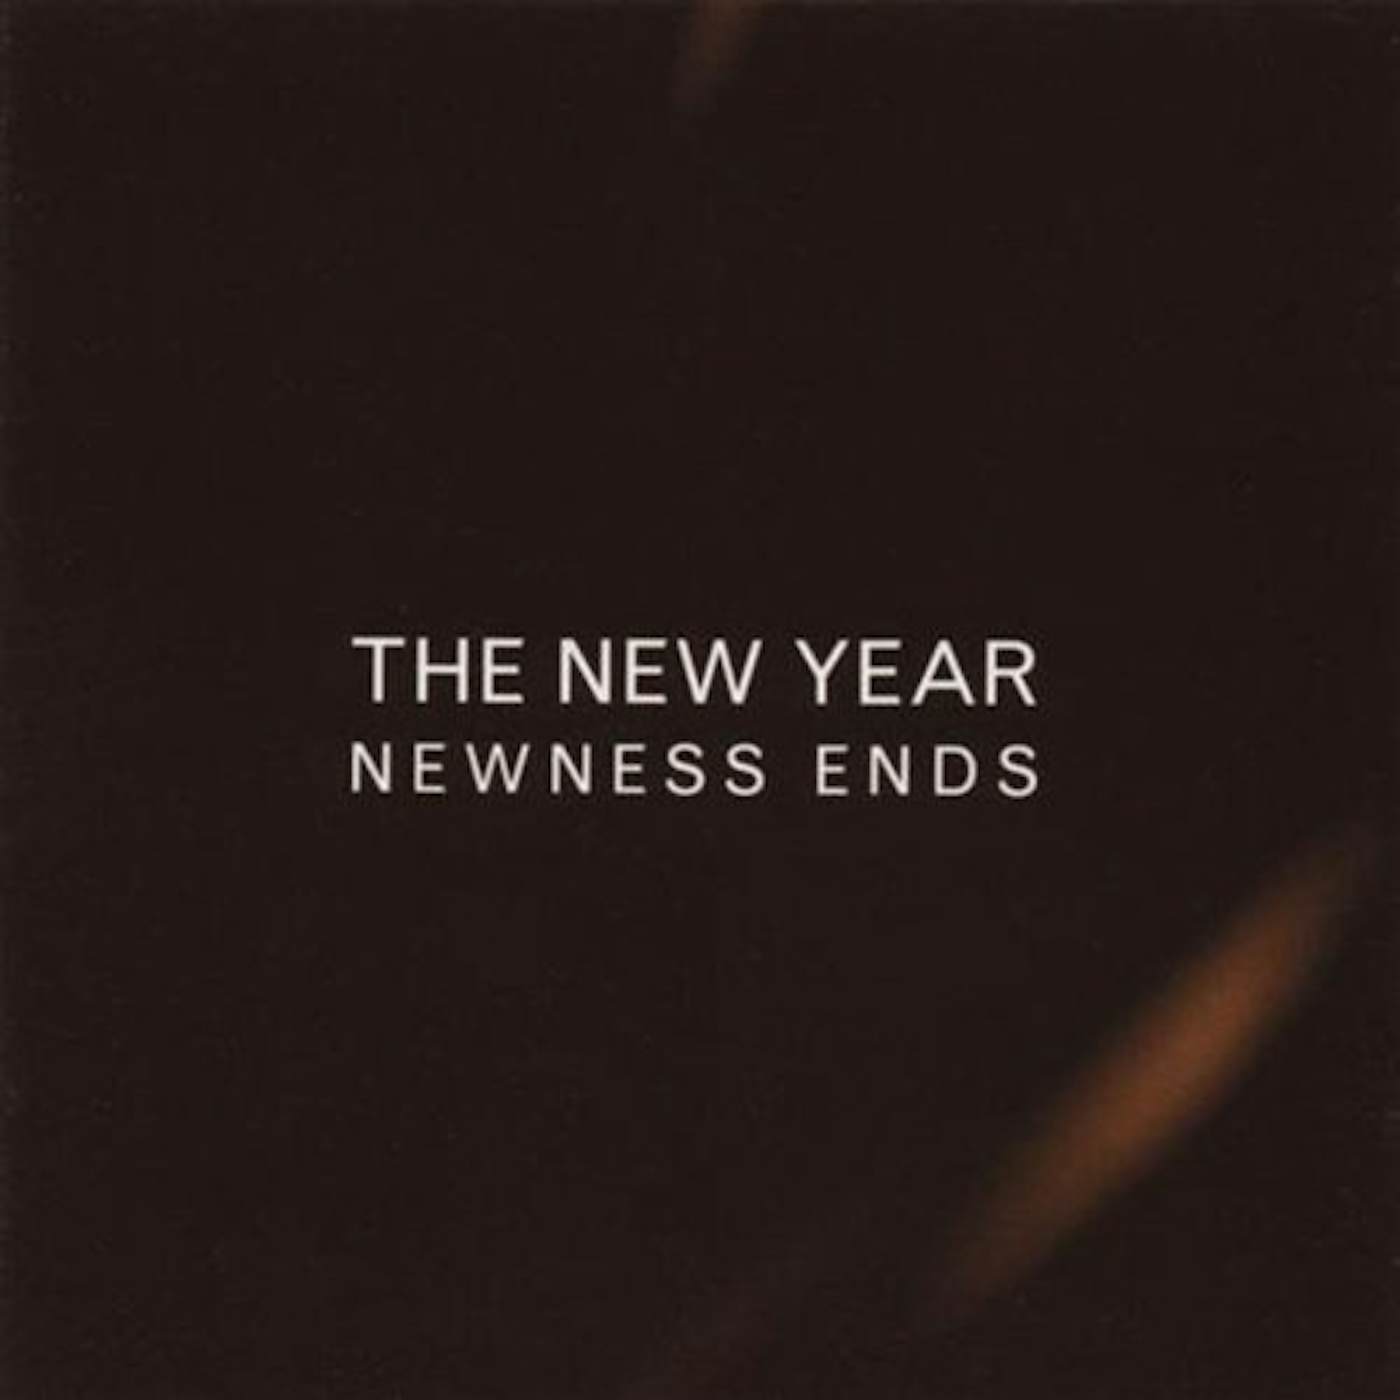 The New Year Newness Ends Vinyl Record